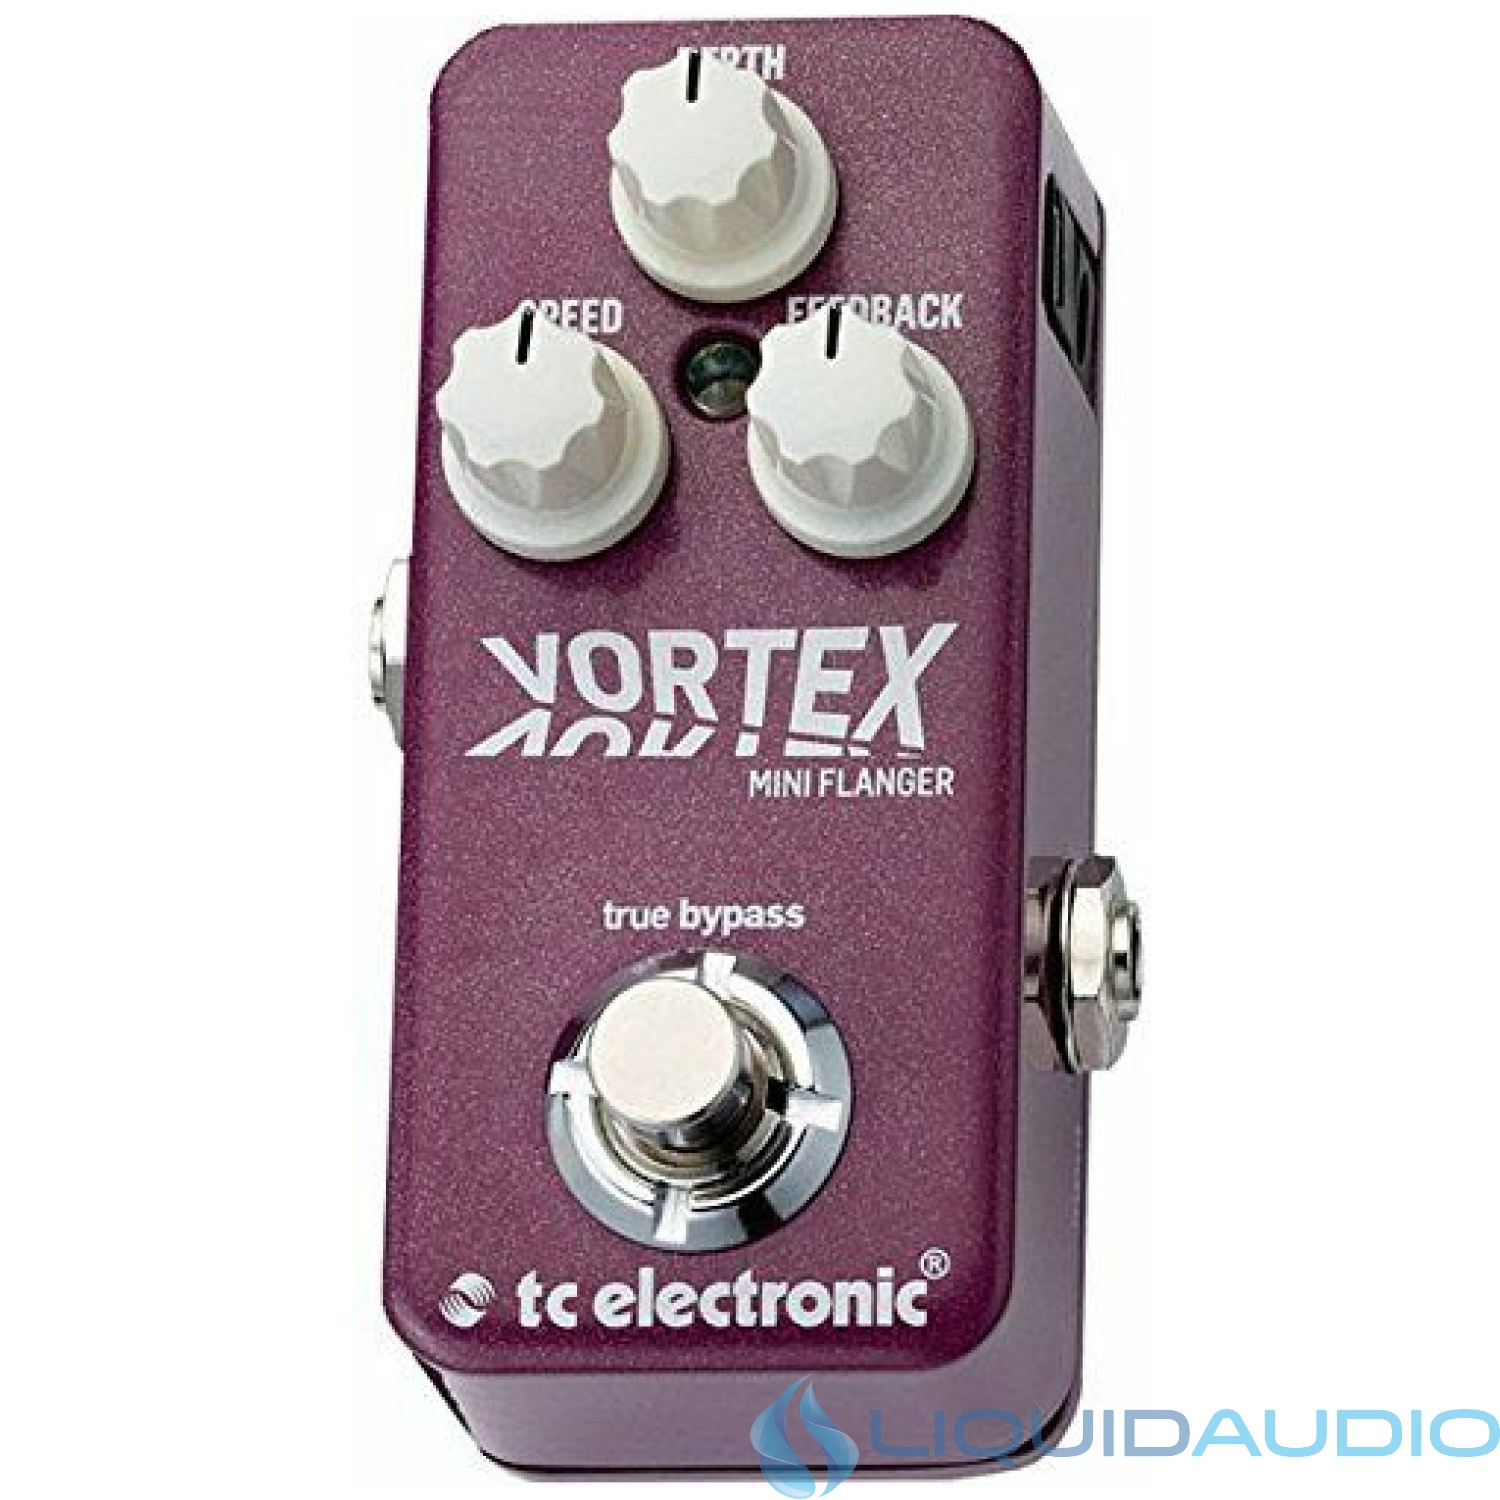 TC Electronic Vortex Mini Flanger Guitar Effect Pedal NEW! FREE 2-DAY DELIVERY!!